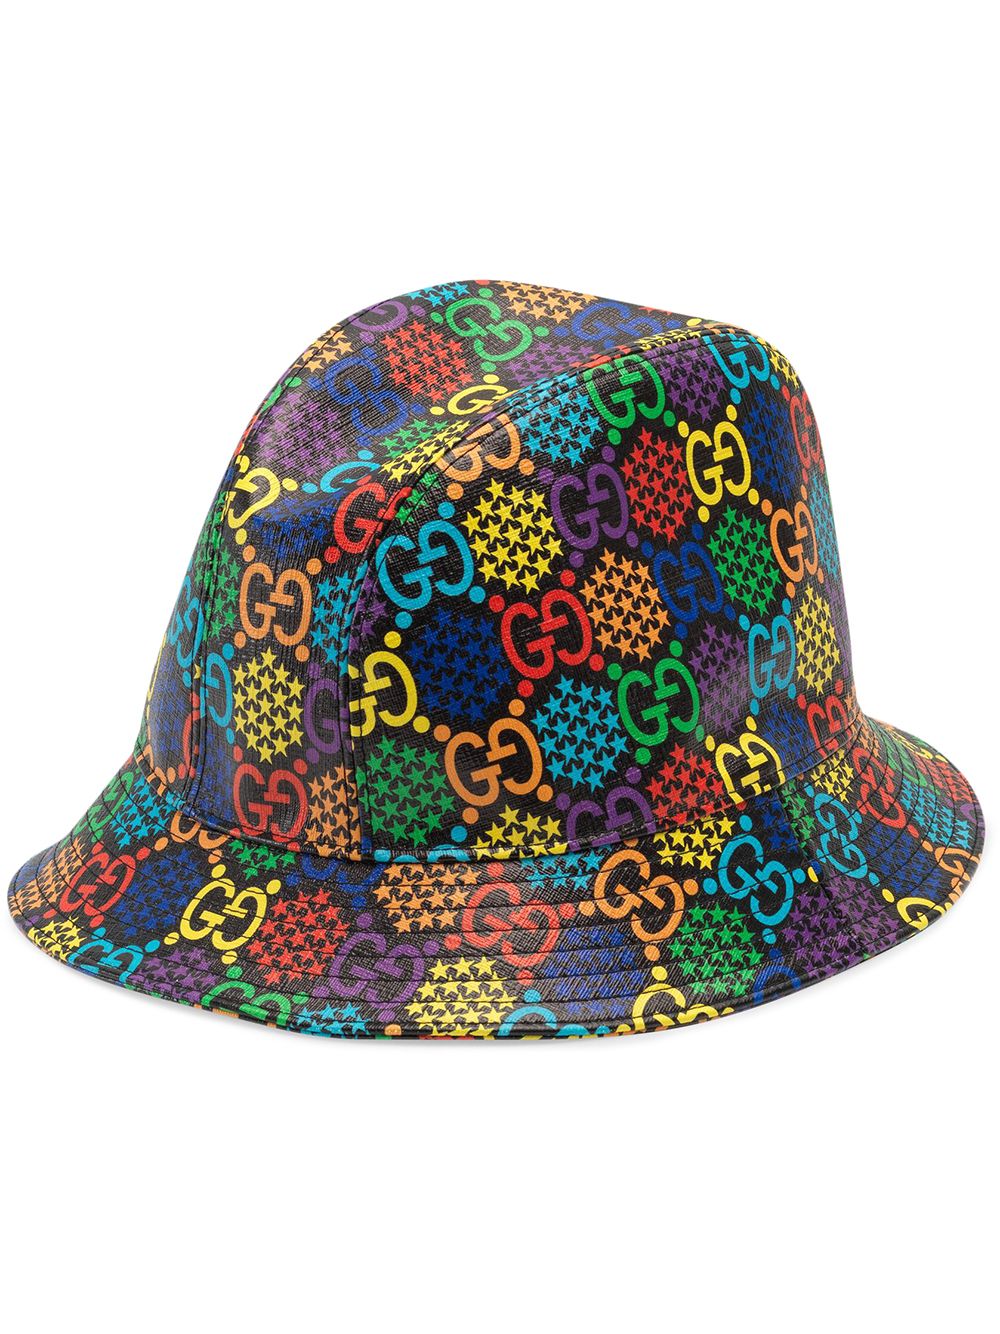 Gucci Gg Psychedelic Fedora Hat In Black